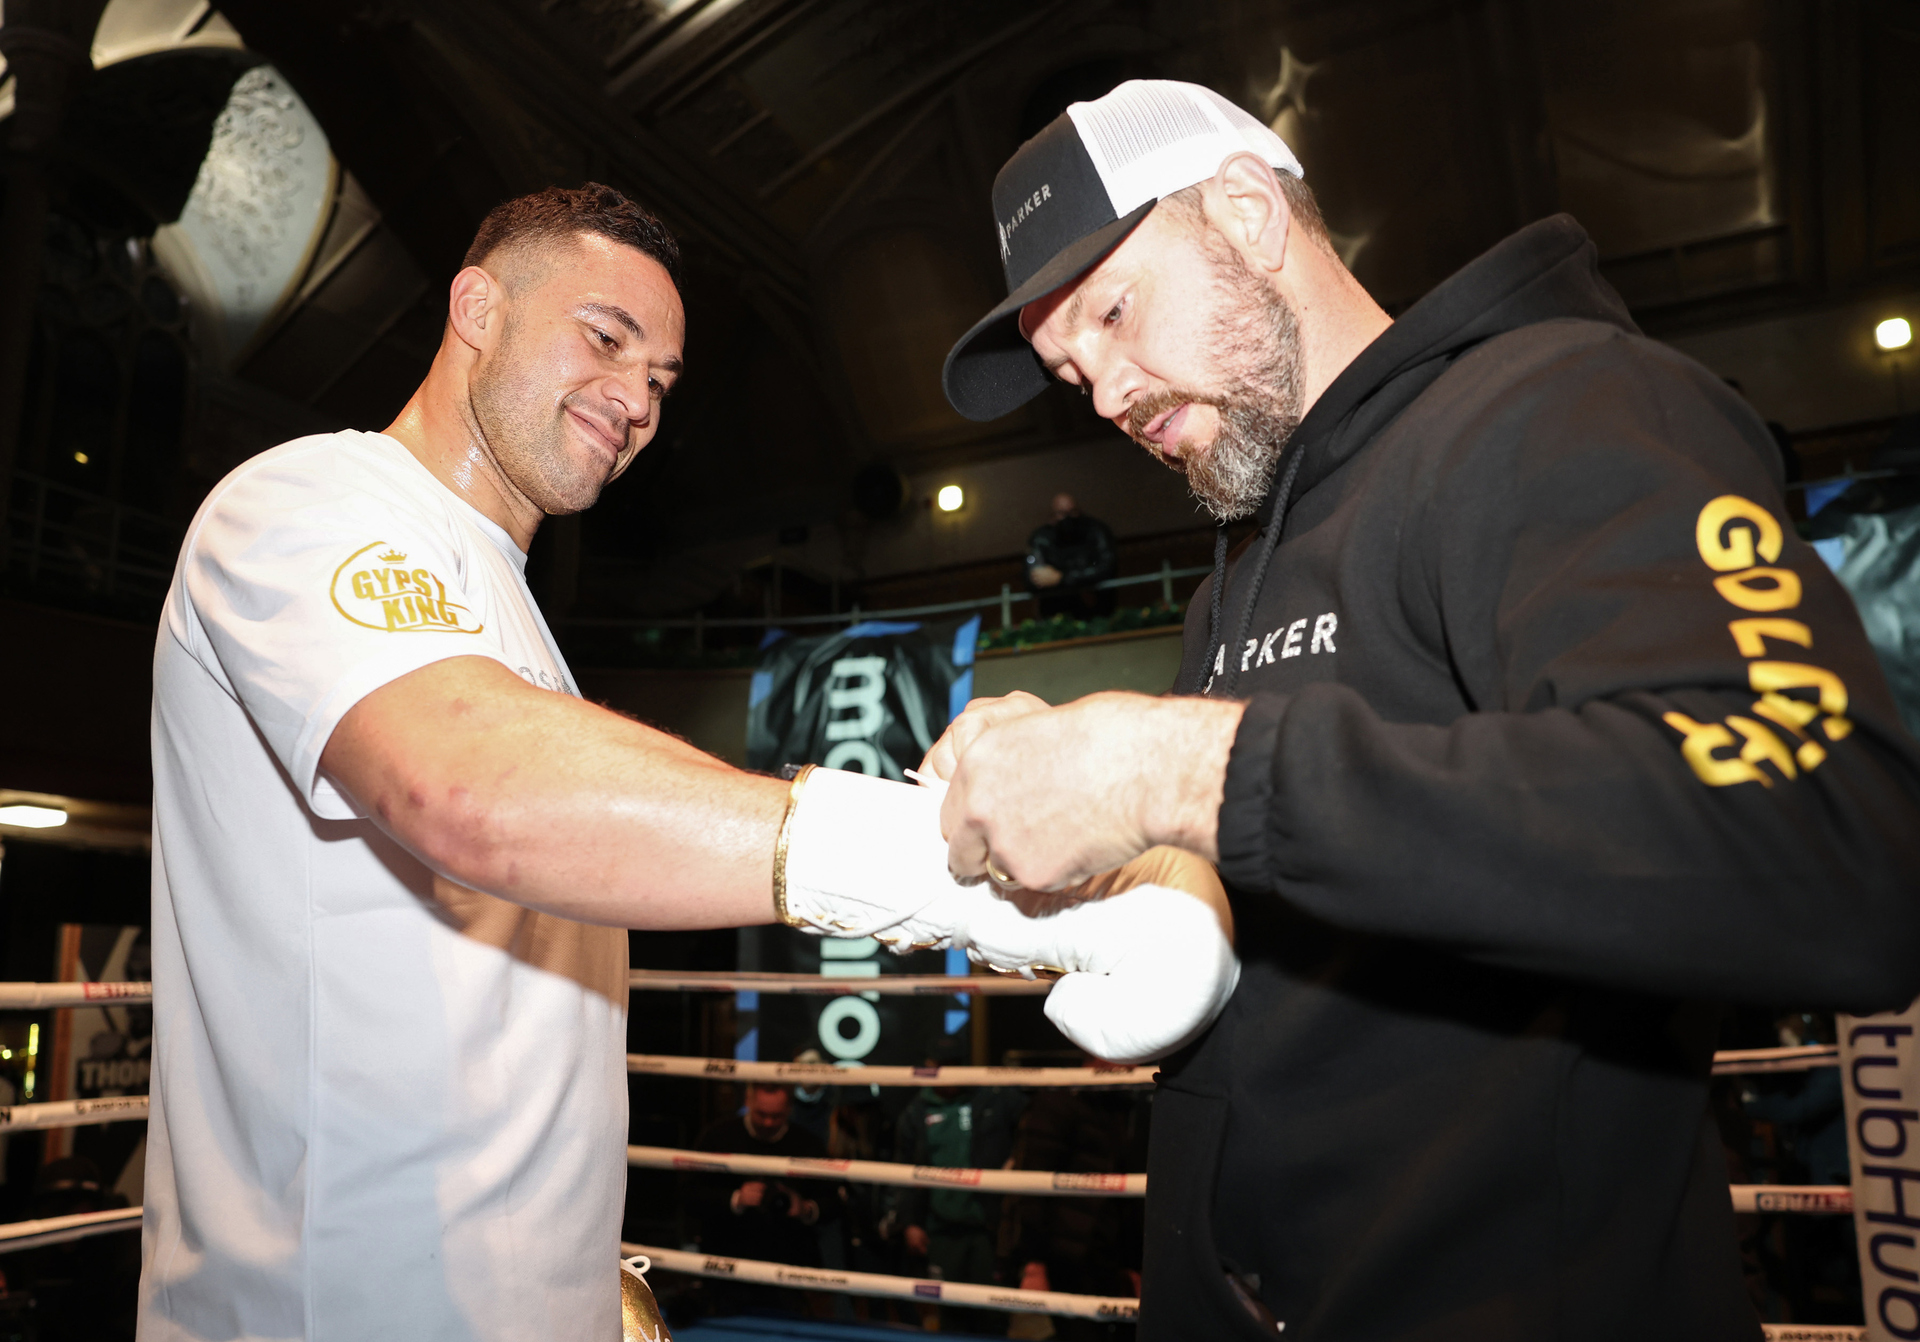 Boxing Joseph Parker to serve as backup fighter for Tyson Fury title fight at Wembley Stadium